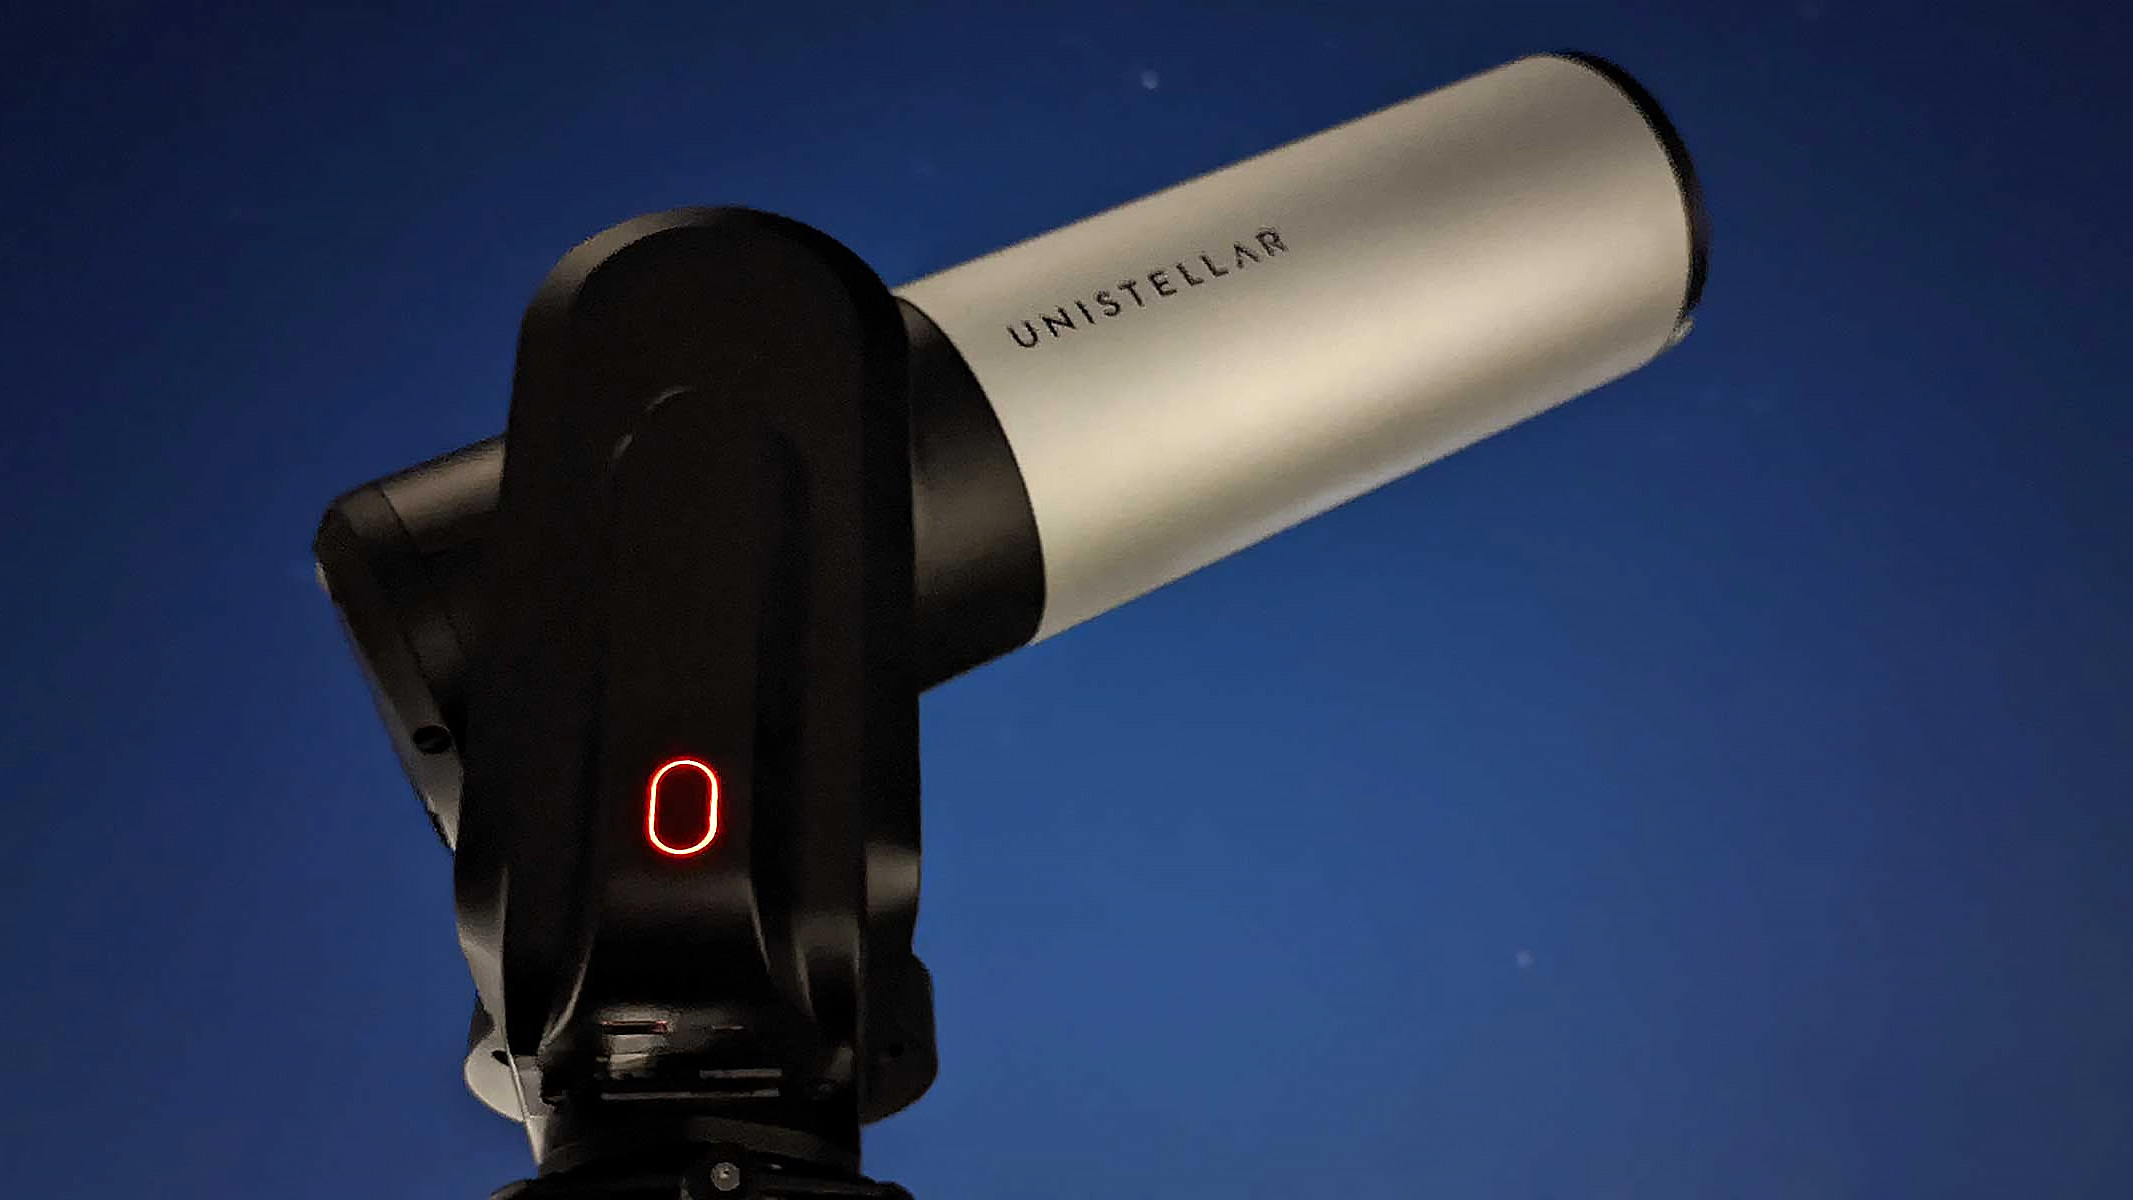 A photo of the Unistellar eVscope 2 pointed up at the night sky